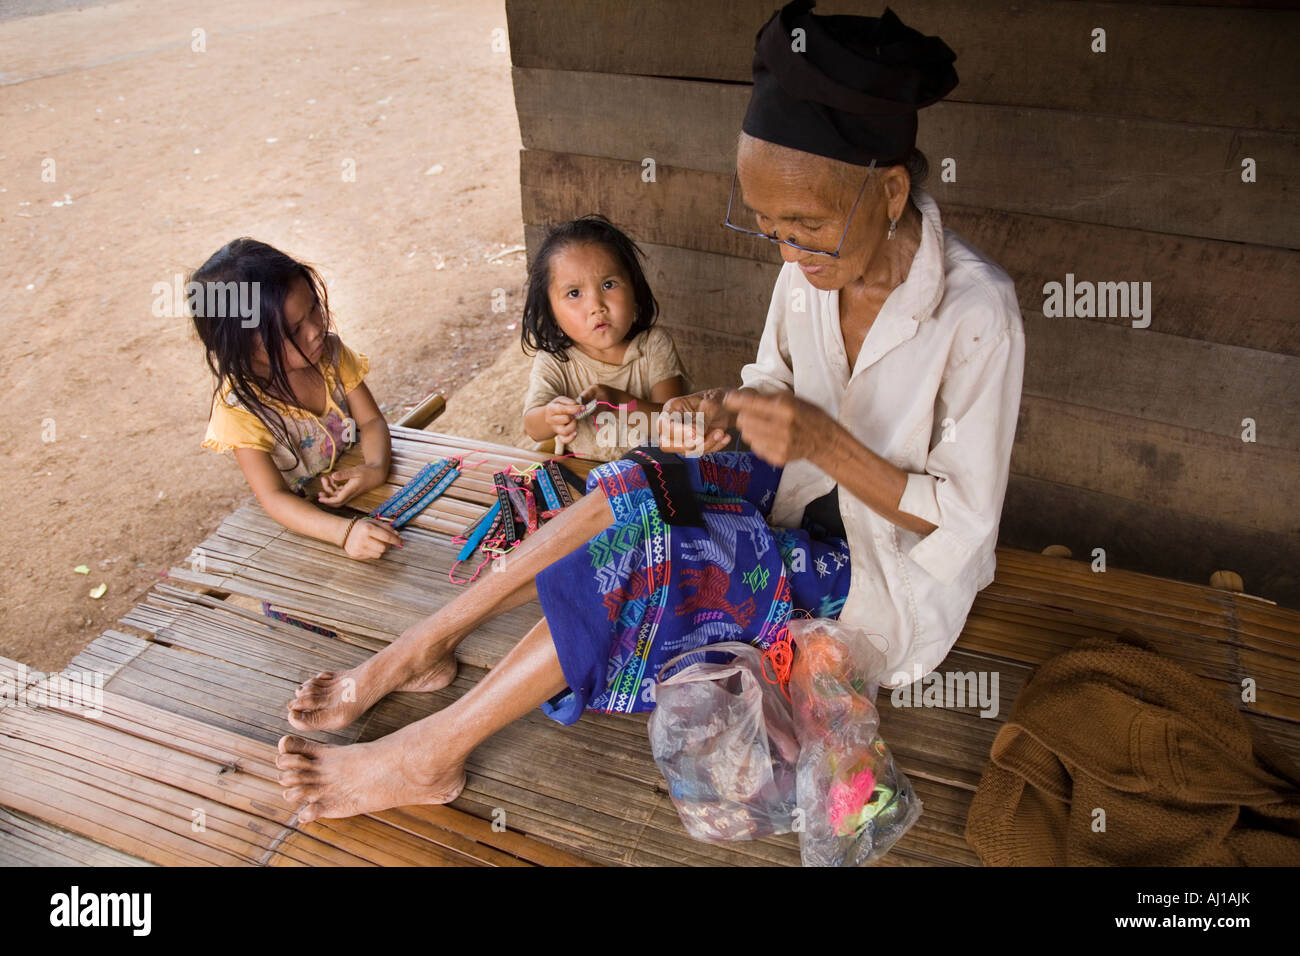 Children and elderly woman making wrist bands to sell tourists in Hmong tribal village near Luang Prabang Laos Stock Photo